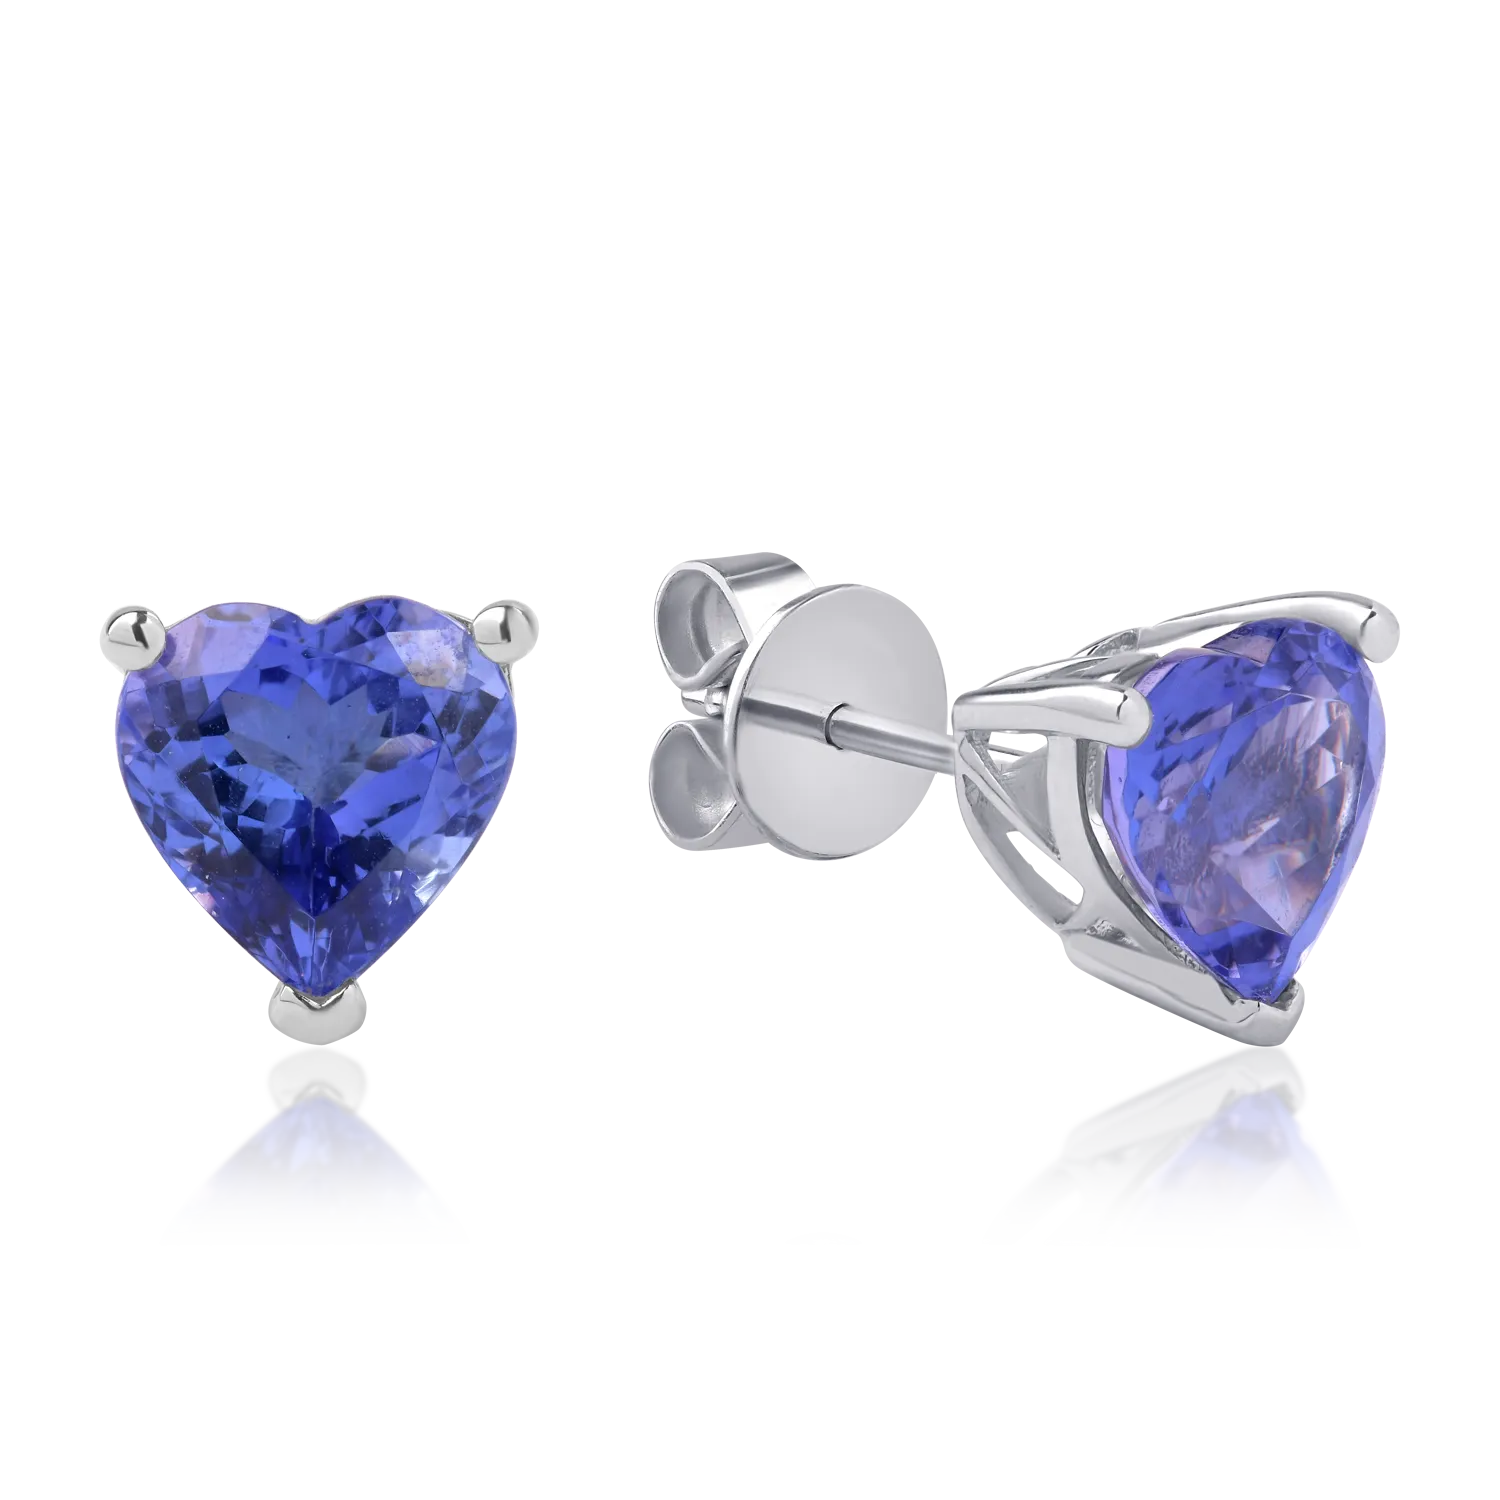 14K white gold earrings with 3.92ct tanzanites